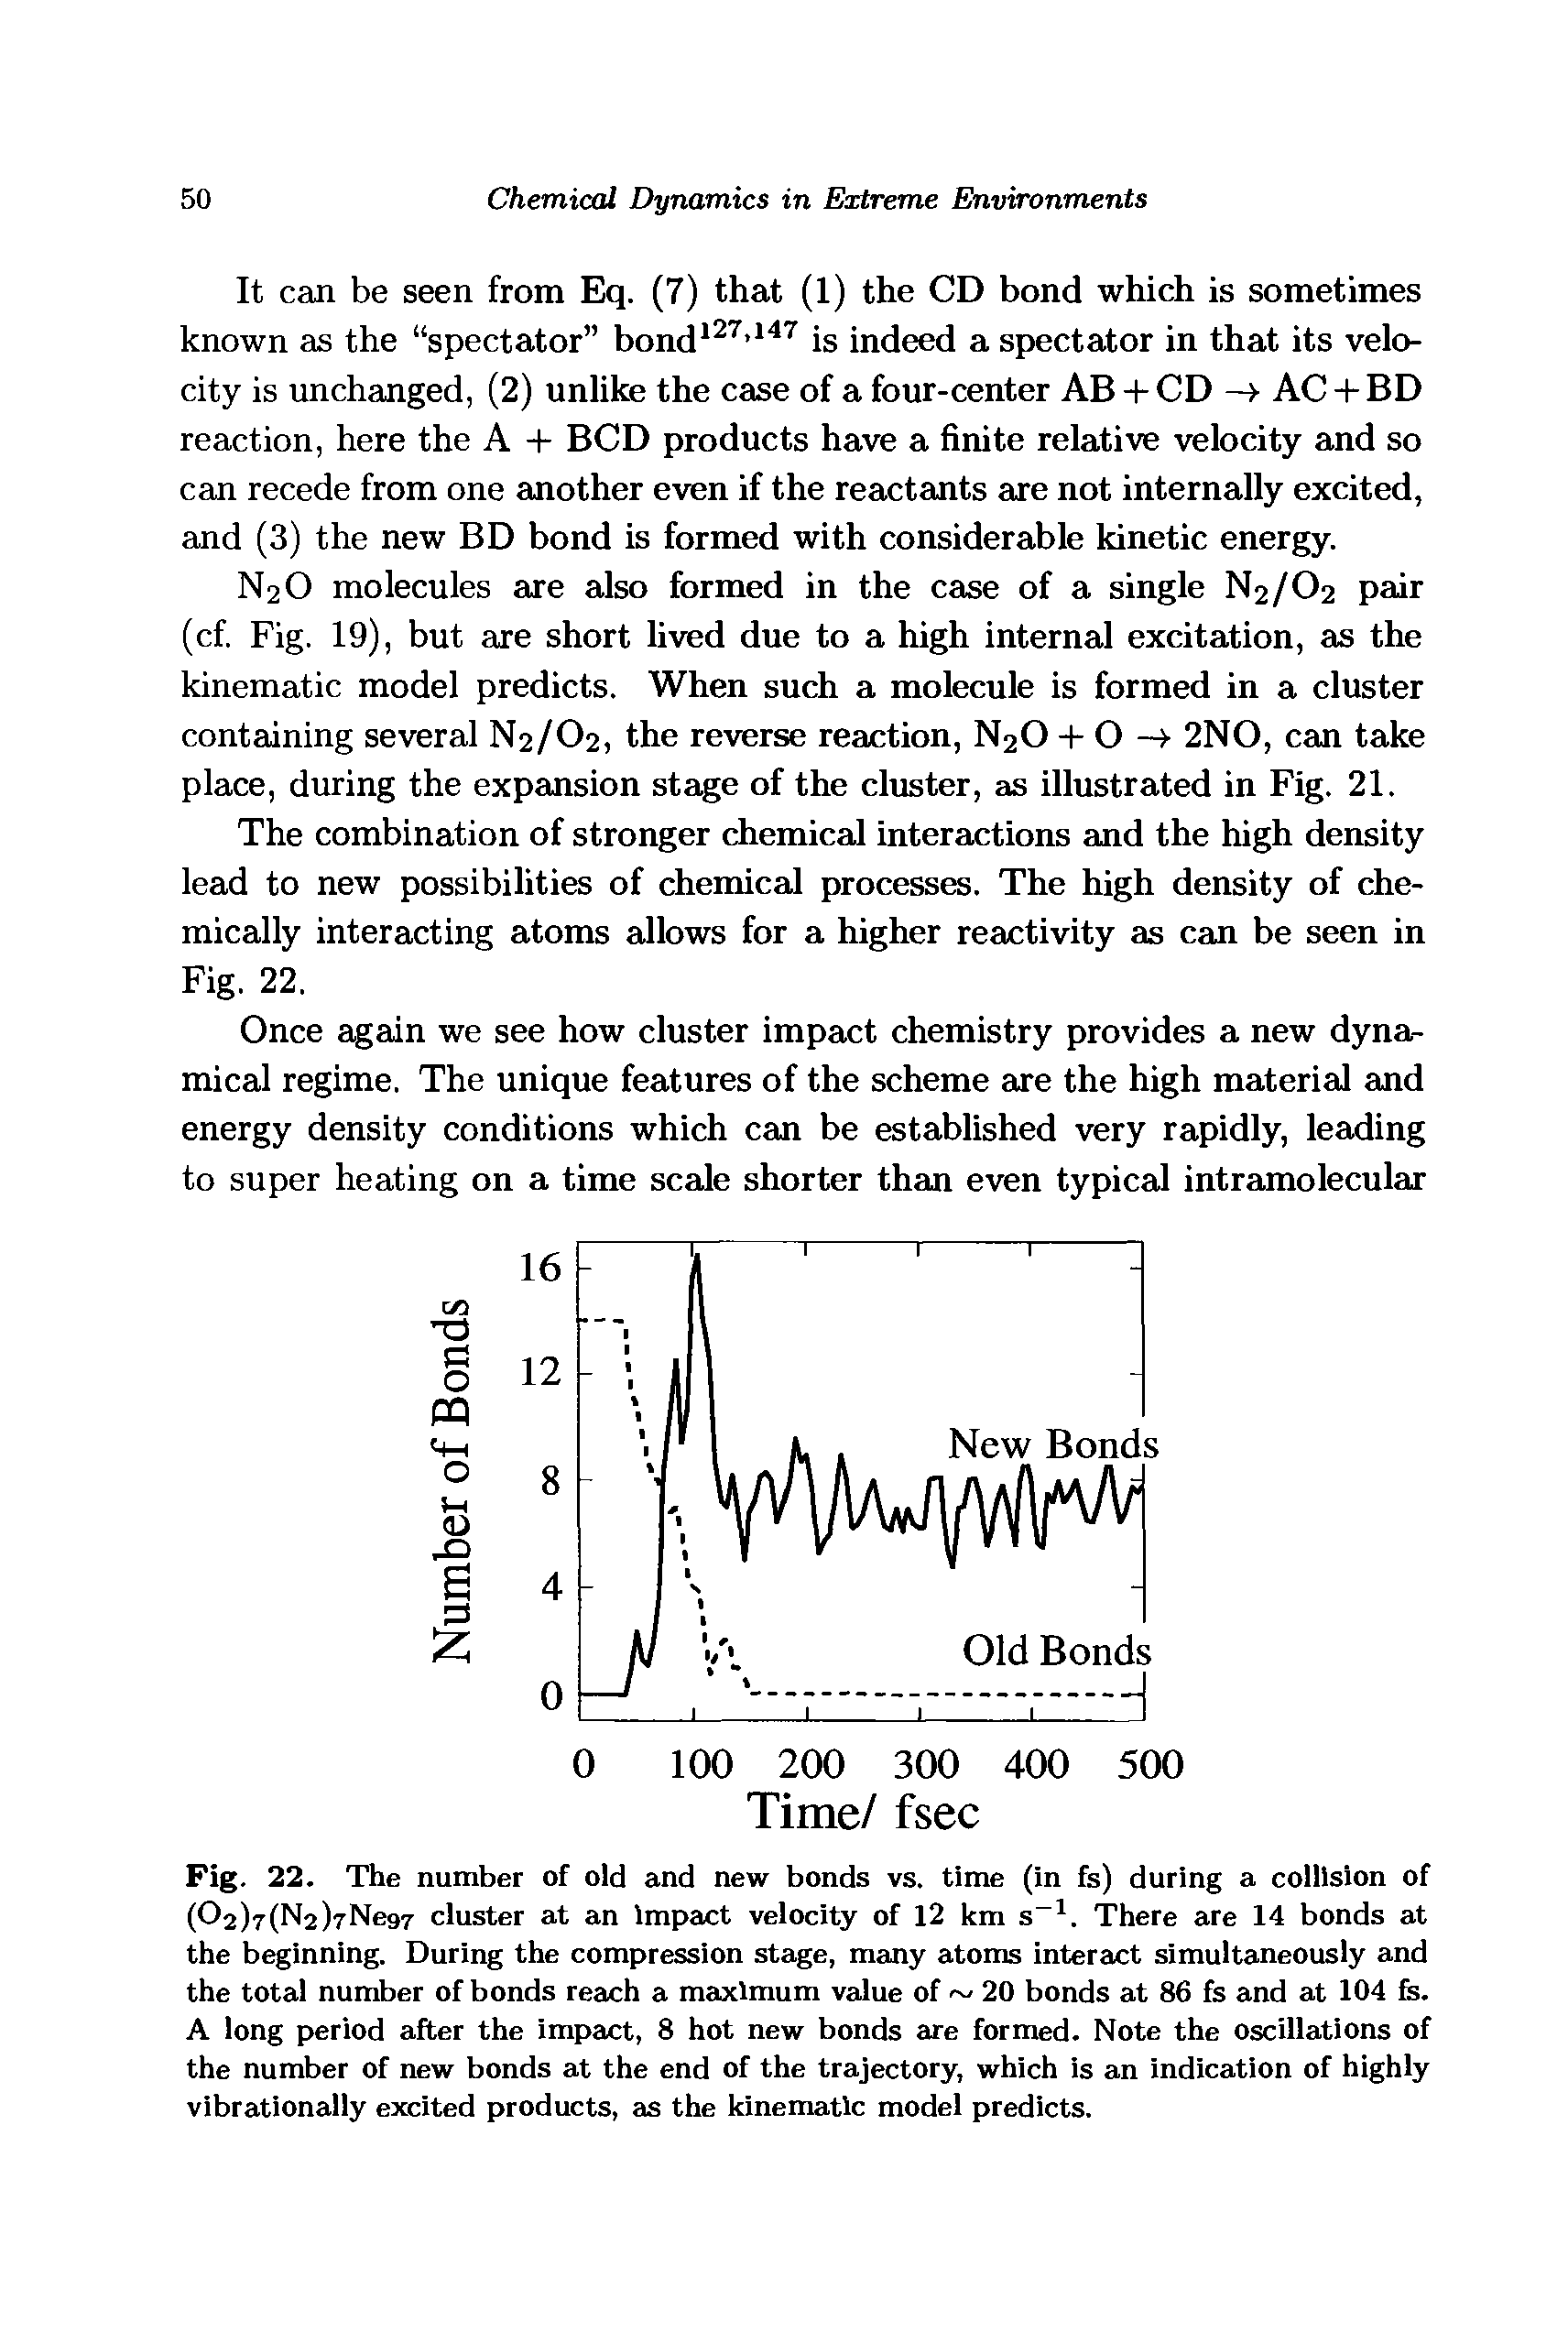 Fig. 22. The number of old and new bonds vs. time (in fs) during a collision of (02)7(N2)7Ne97 cluster at an Impact velocity of 12 km s . There are 14 bonds at the beginning. During the compression stage, many atoms interact simultaneously and the total number of bonds reach a maximum value of 20 bonds at 86 fs and at 104 fe. A long period after the impact, 8 hot new bonds are formed. Note the oscillations of the number of new bonds at the end of the trajectory, which is an indication of highly vibrationally excited products, as the kinematic model predicts.